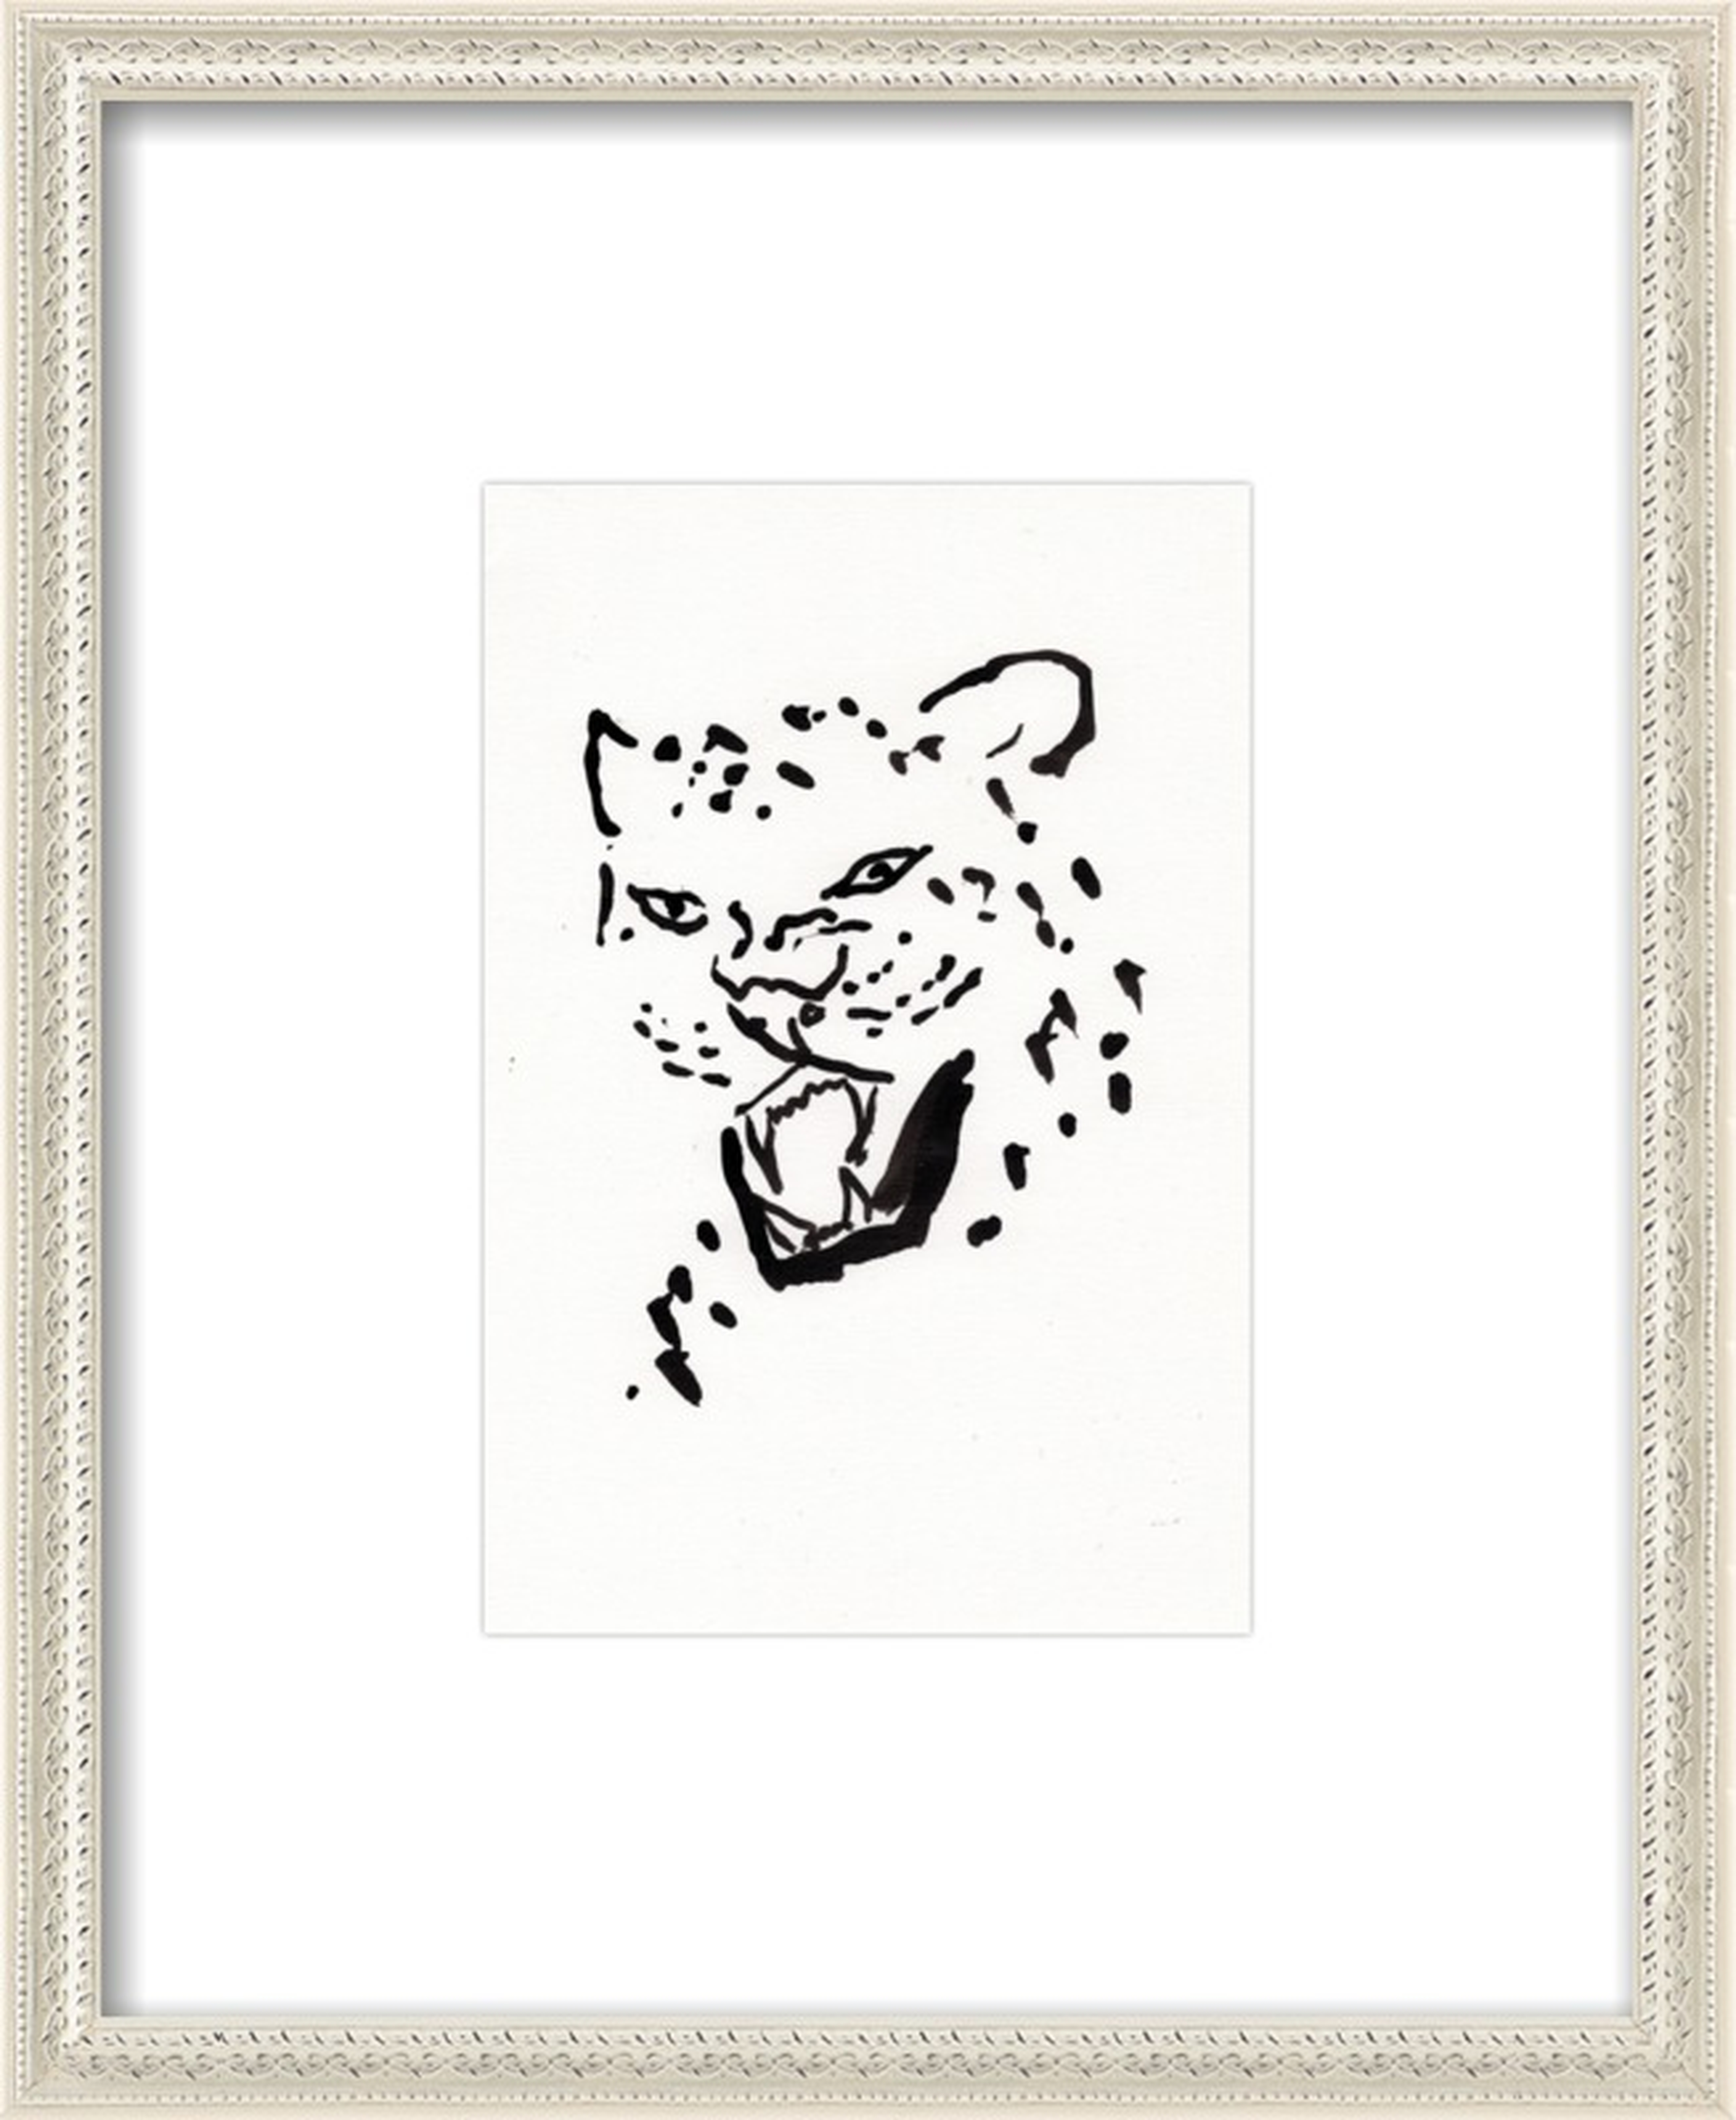 Tiger by Or Lapid for Artfully Walls - Artfully Walls